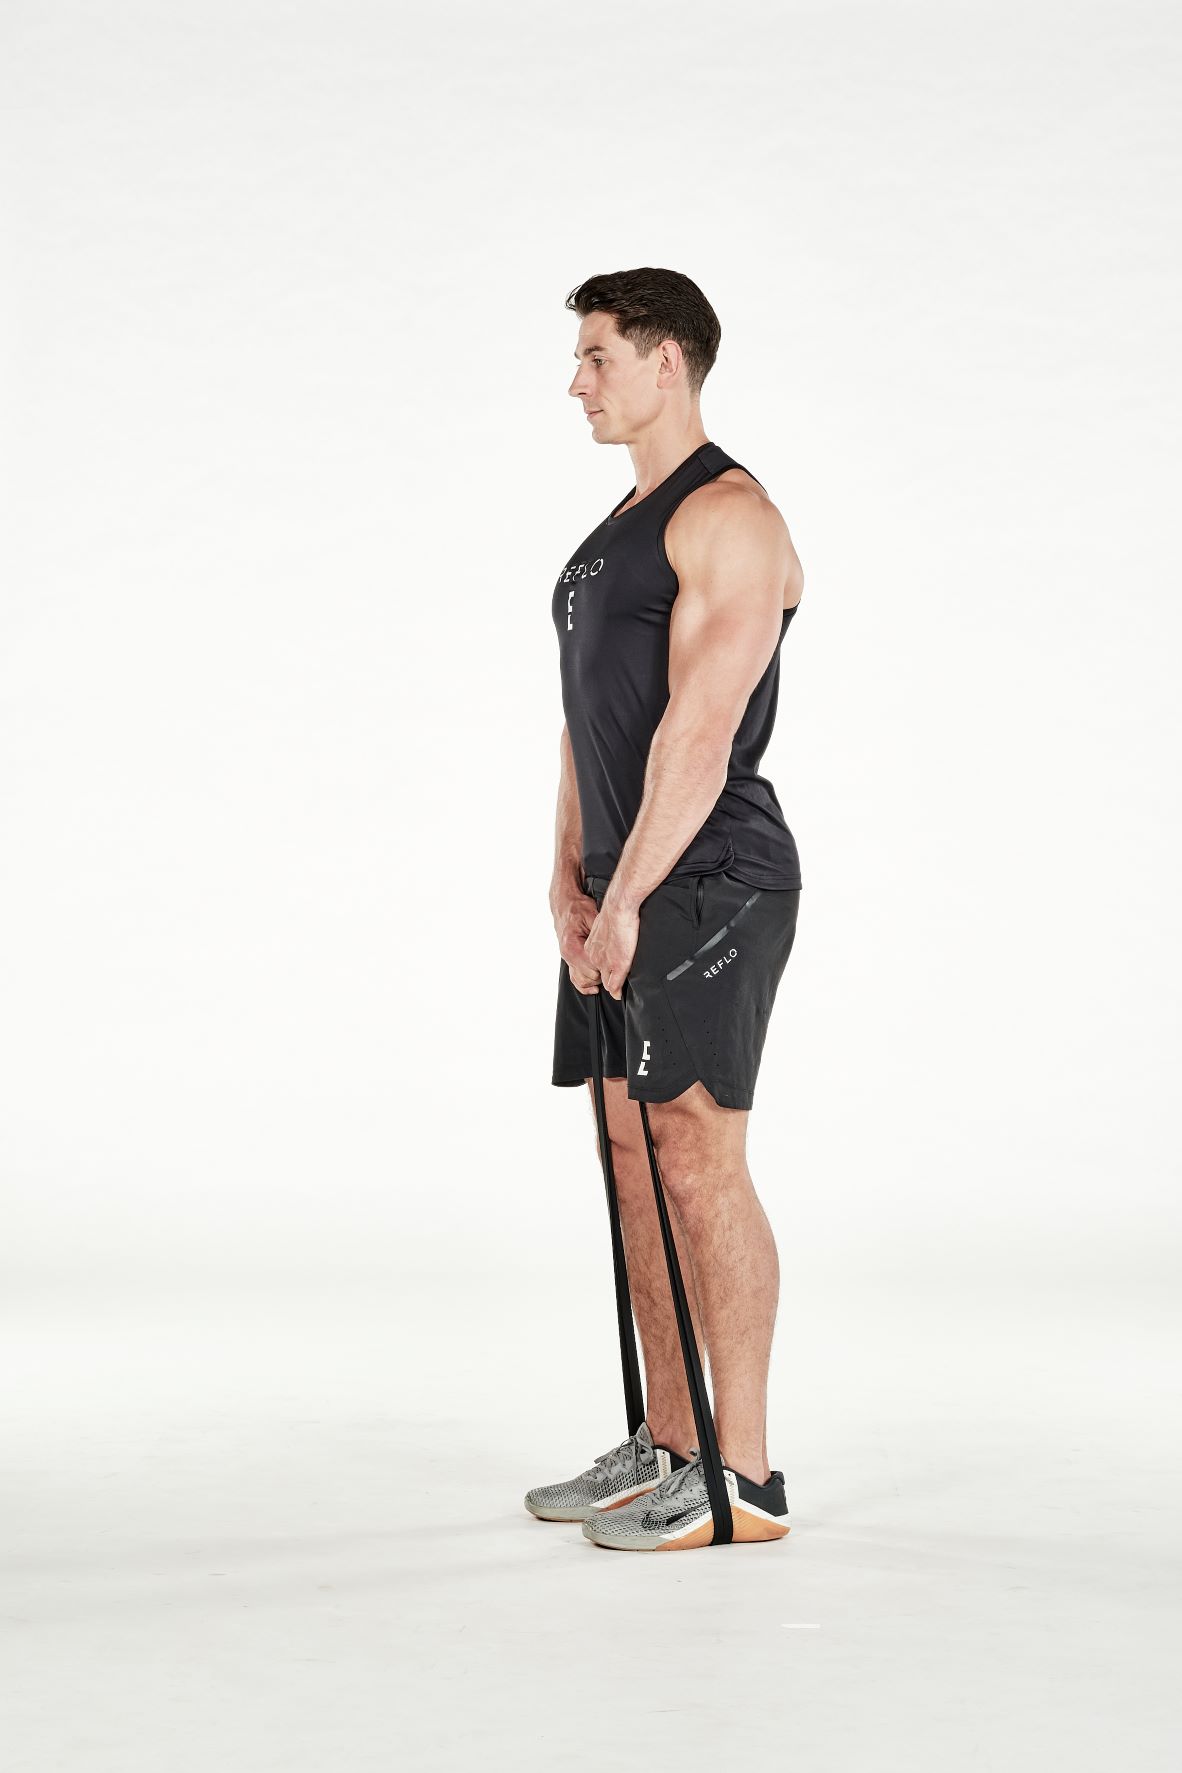 man demonstrating step two of resistance band deadlift; he is standing up straight, holding a resistance band that is wrapped around his feet; he wears a black fitness vest, black shorts and trainers